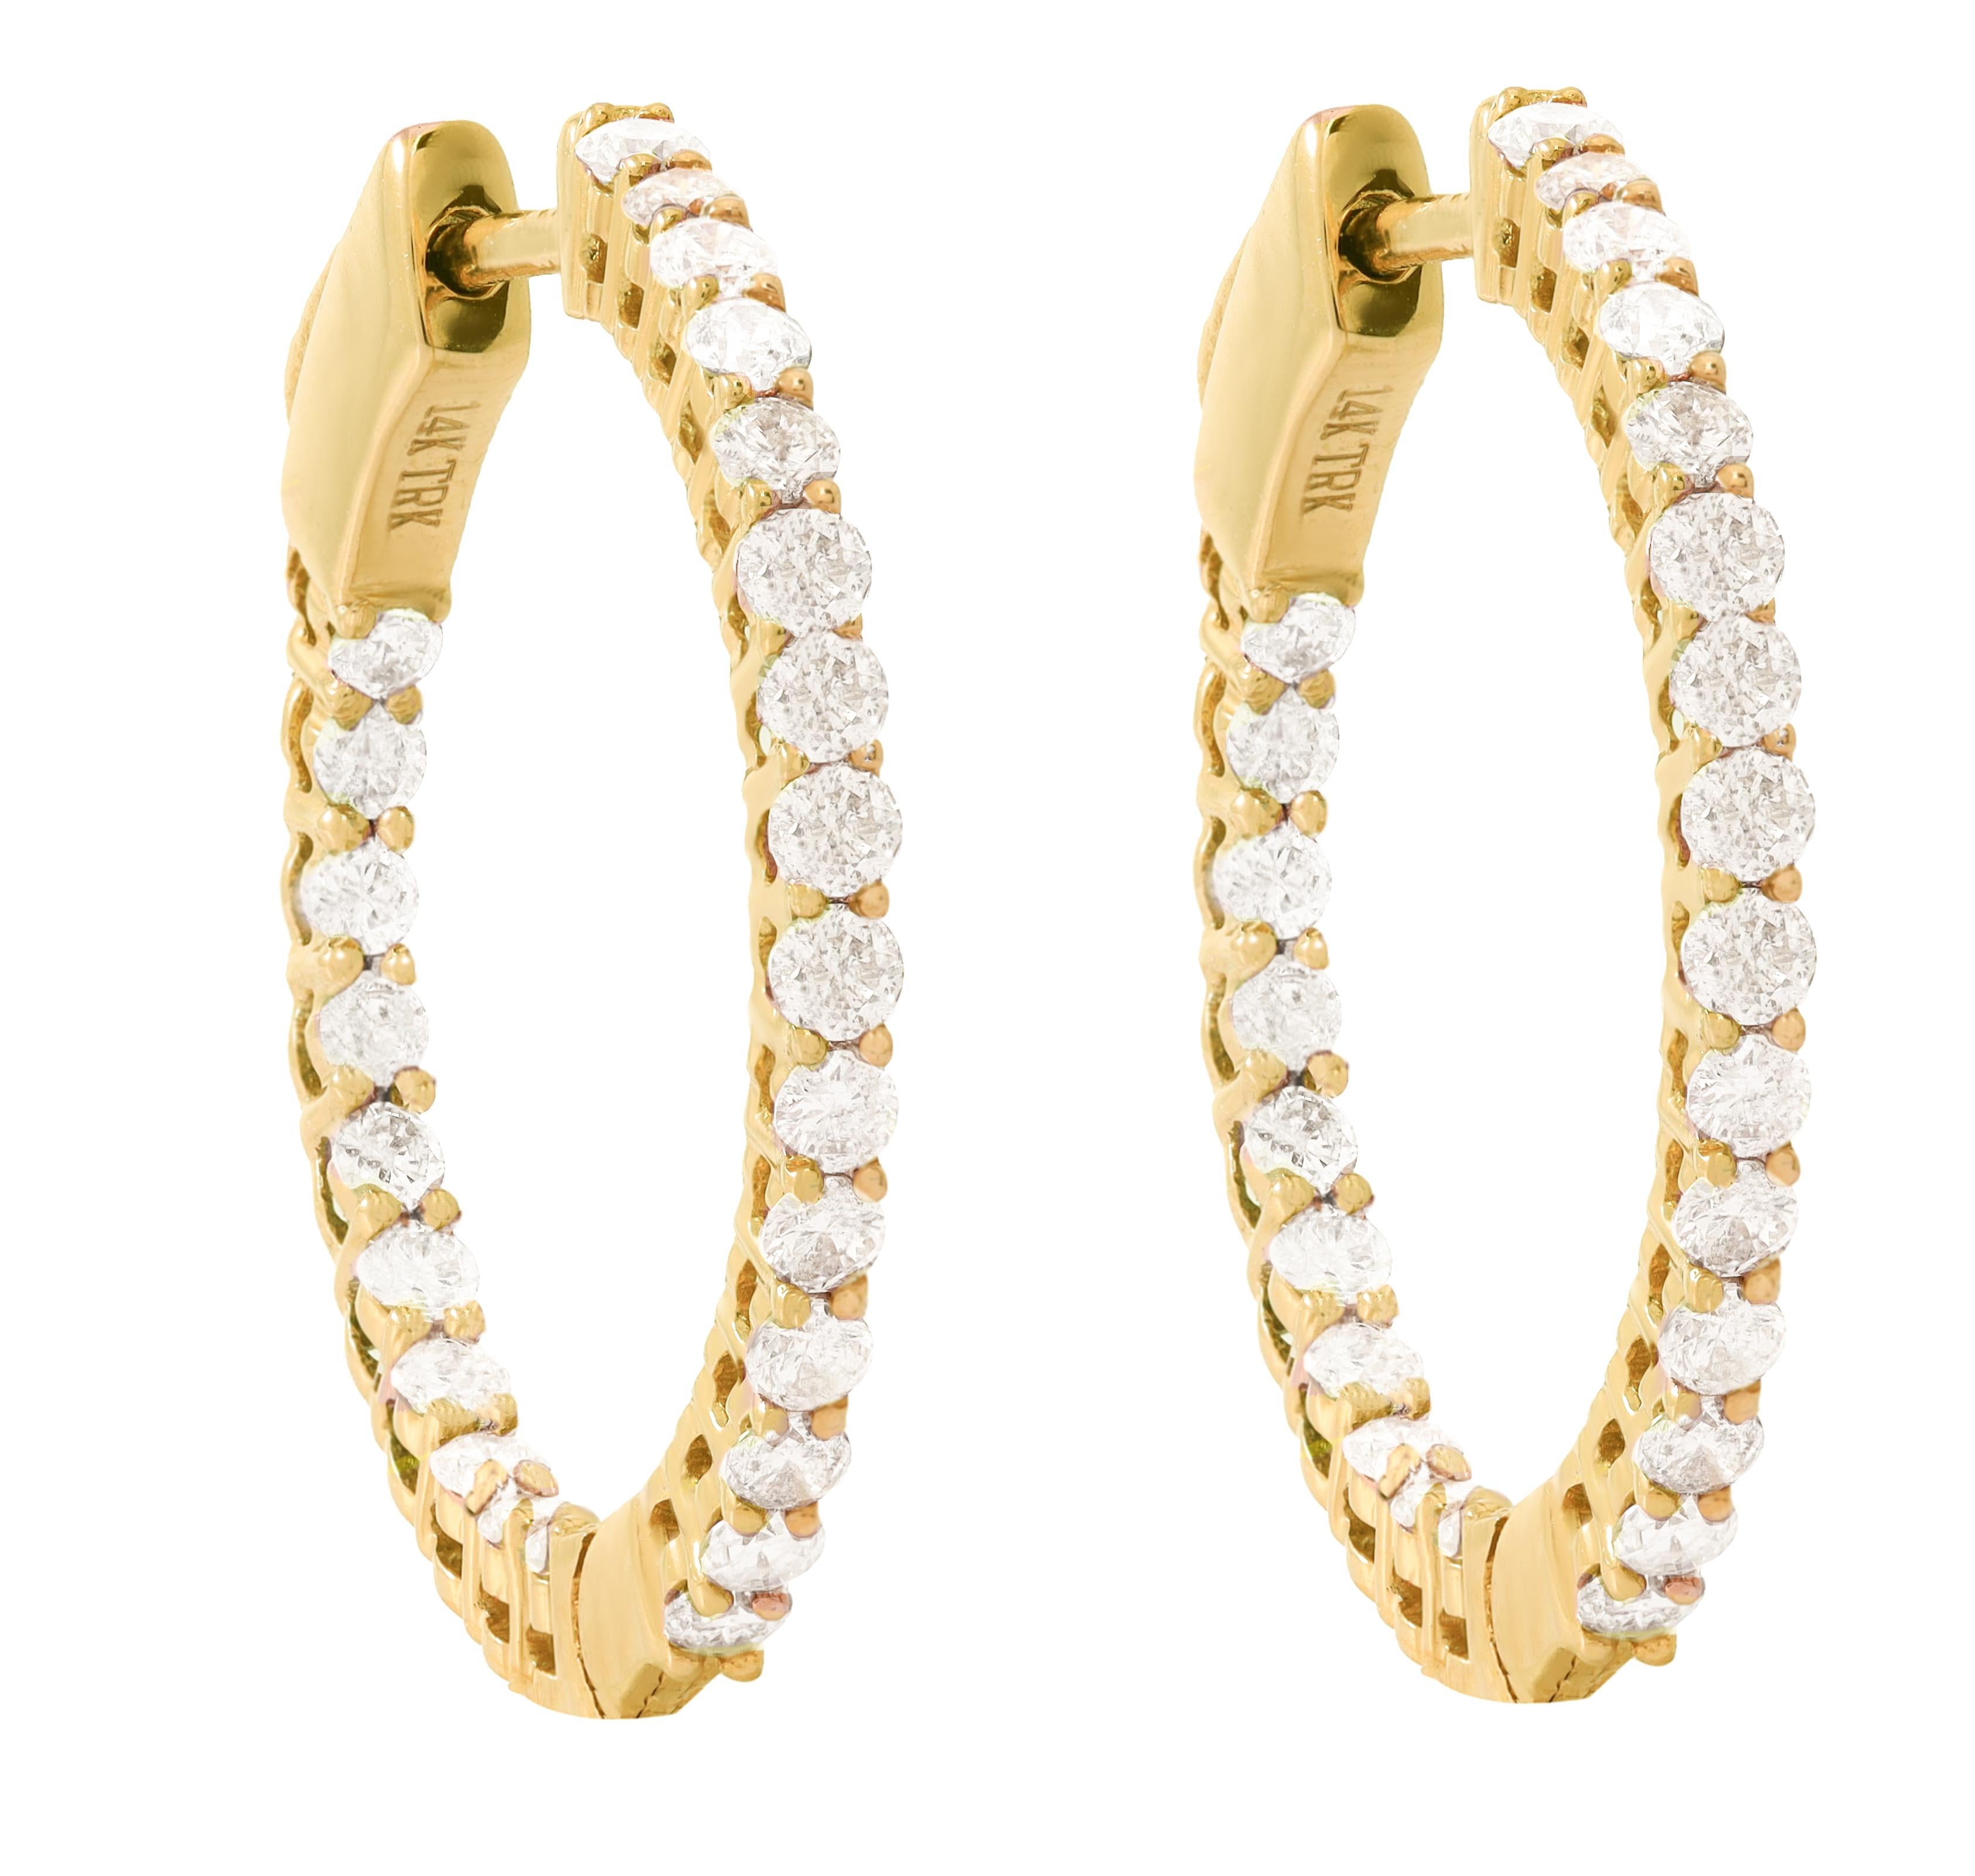 14K Yellow Gold Diamond Earrings featuring 1.00 Carats of Diamonds

Underline your look with this sharp 14K Yellow gold shape Diamond Earrings. High quality Diamonds. This Earrings will underline your exquisite look for any occasion.

. is a leading